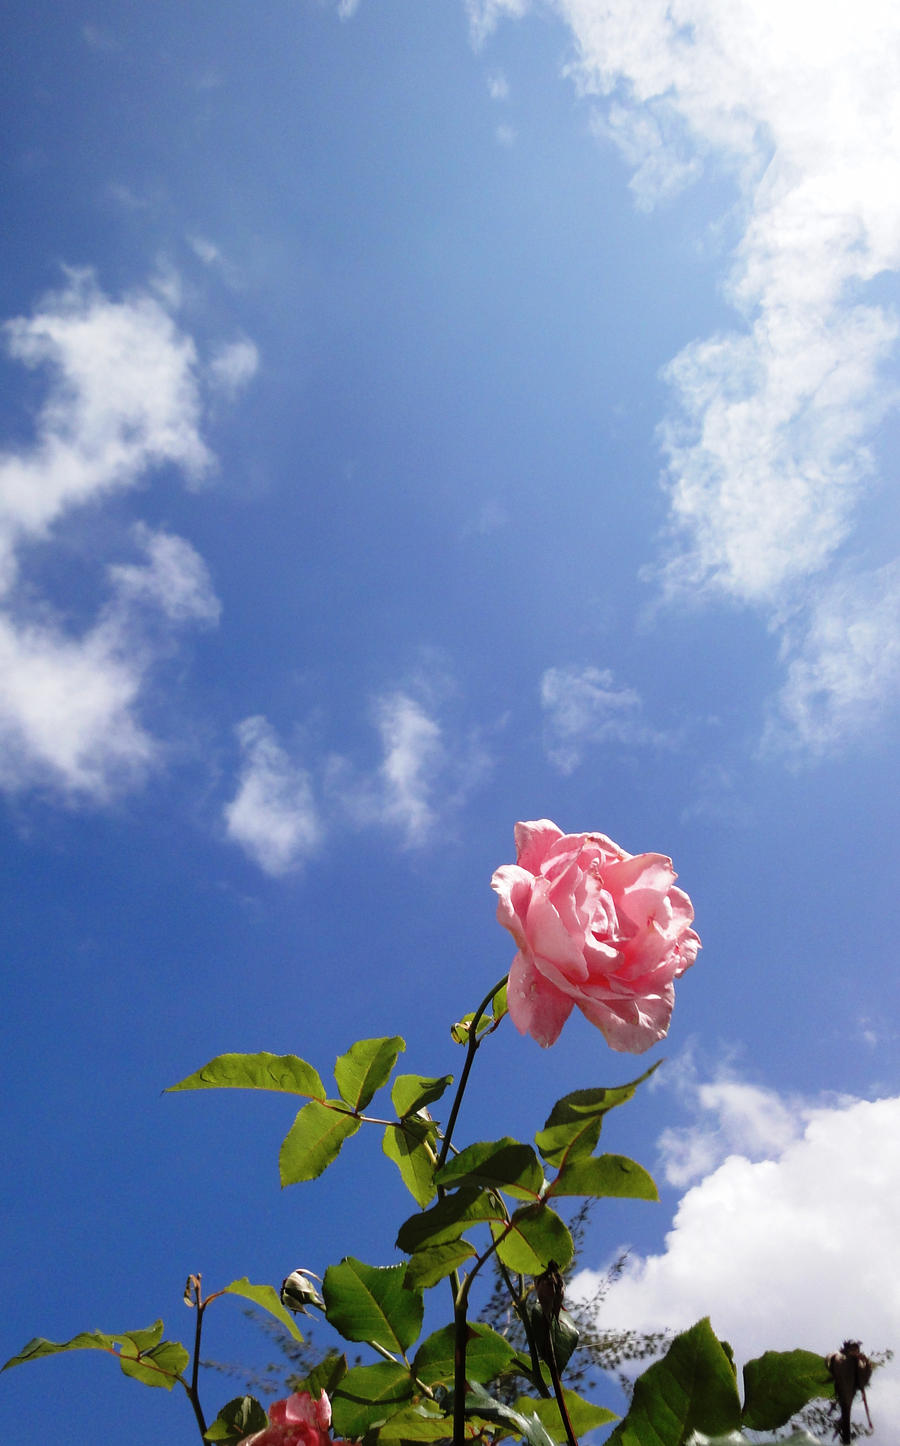 The Rose and Sky